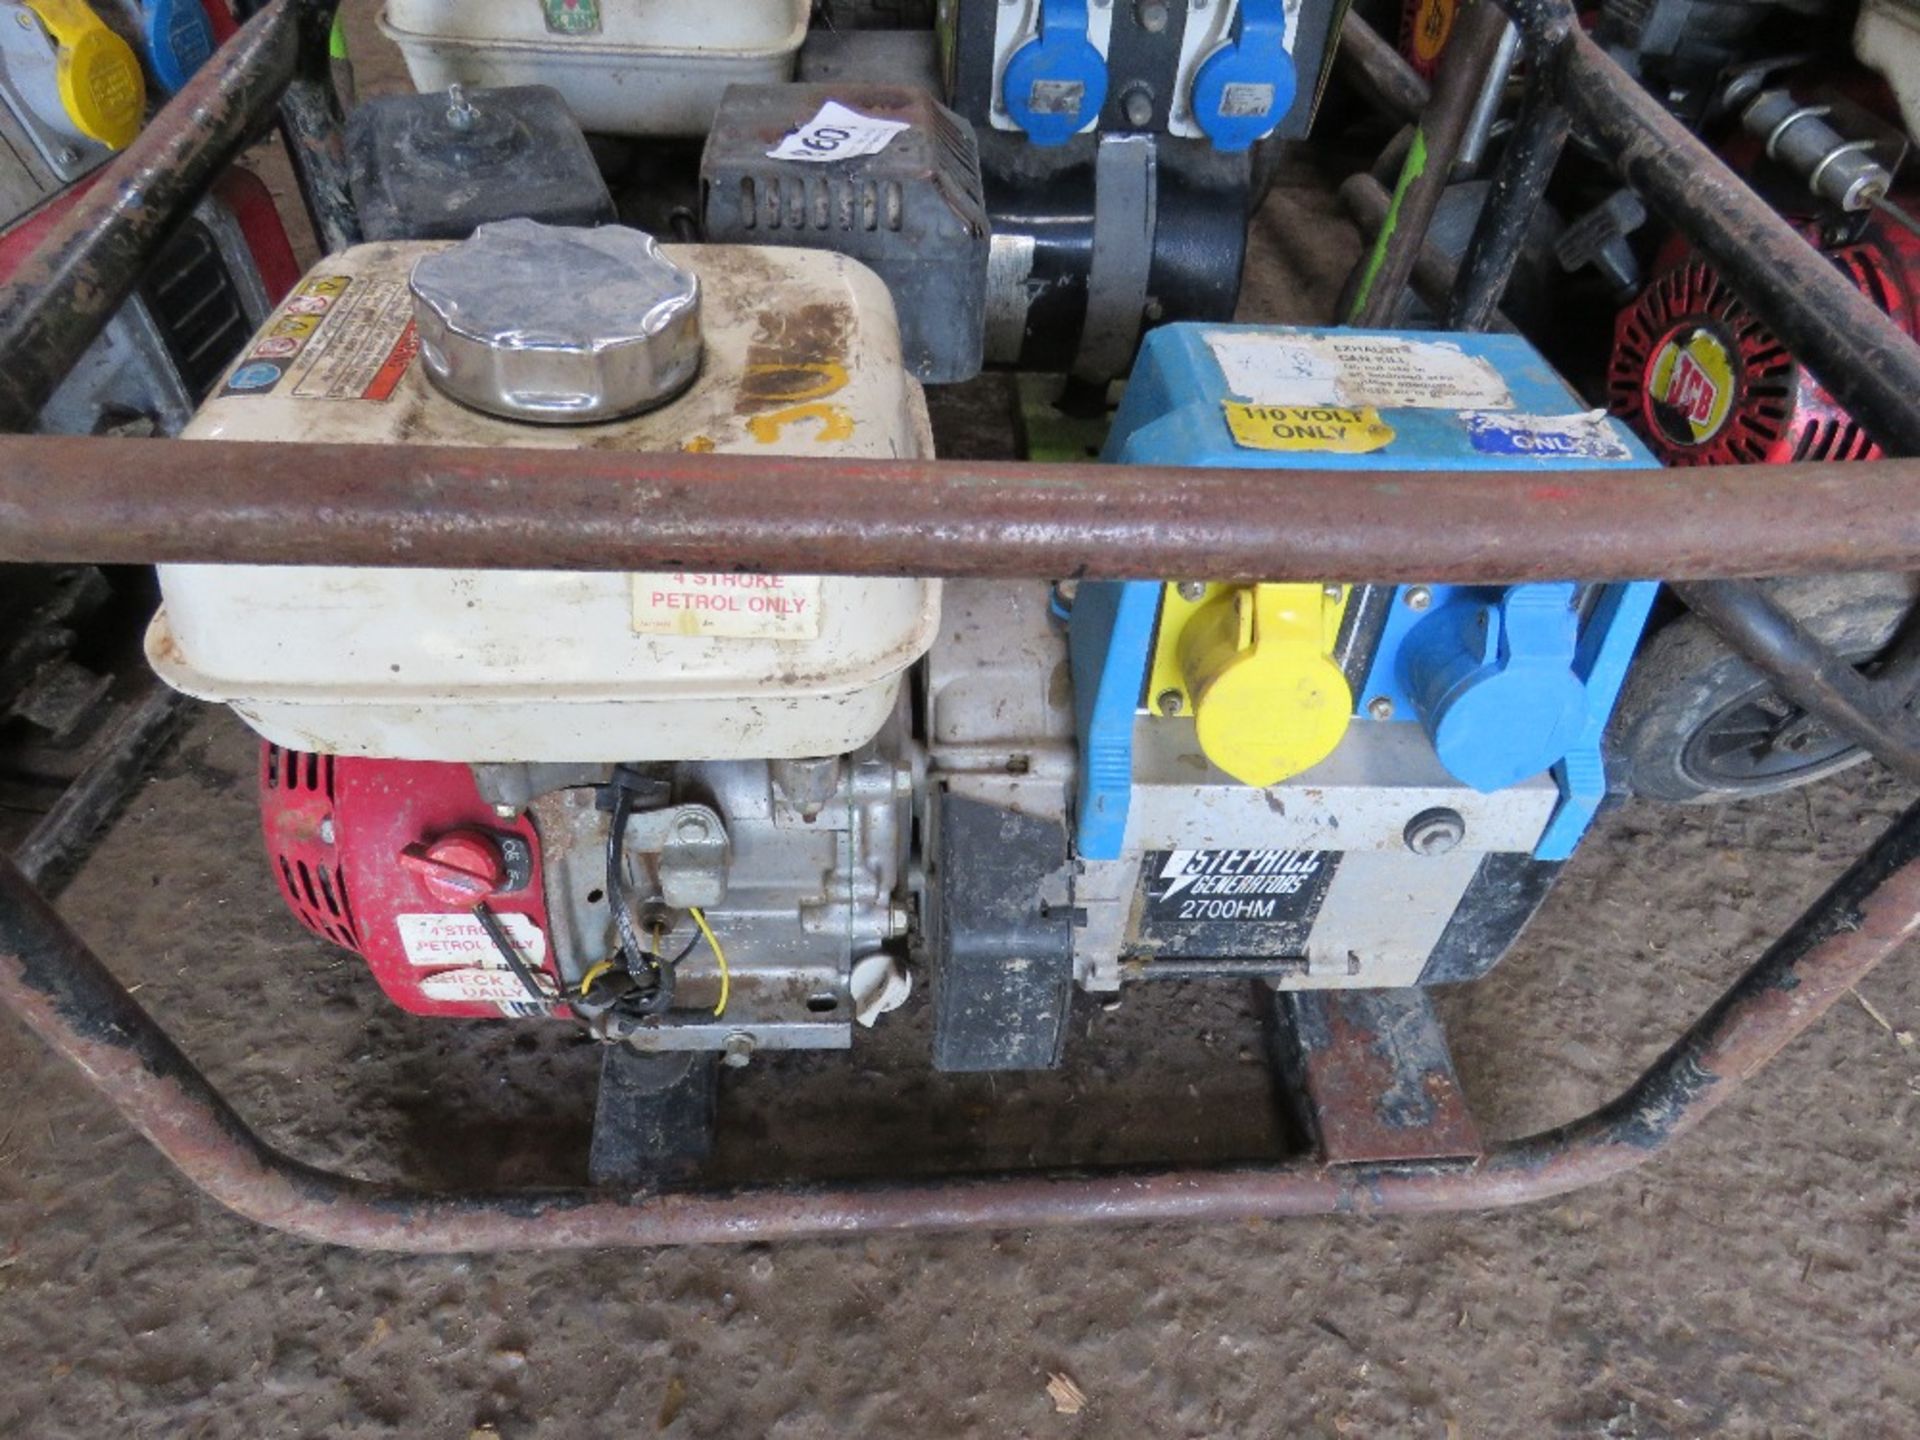 PETROL ENGINED GENERATOR, CONDITION UNKNOWN. DIRECT FROM UTILITIES CONTRACTOR. - Image 3 of 3